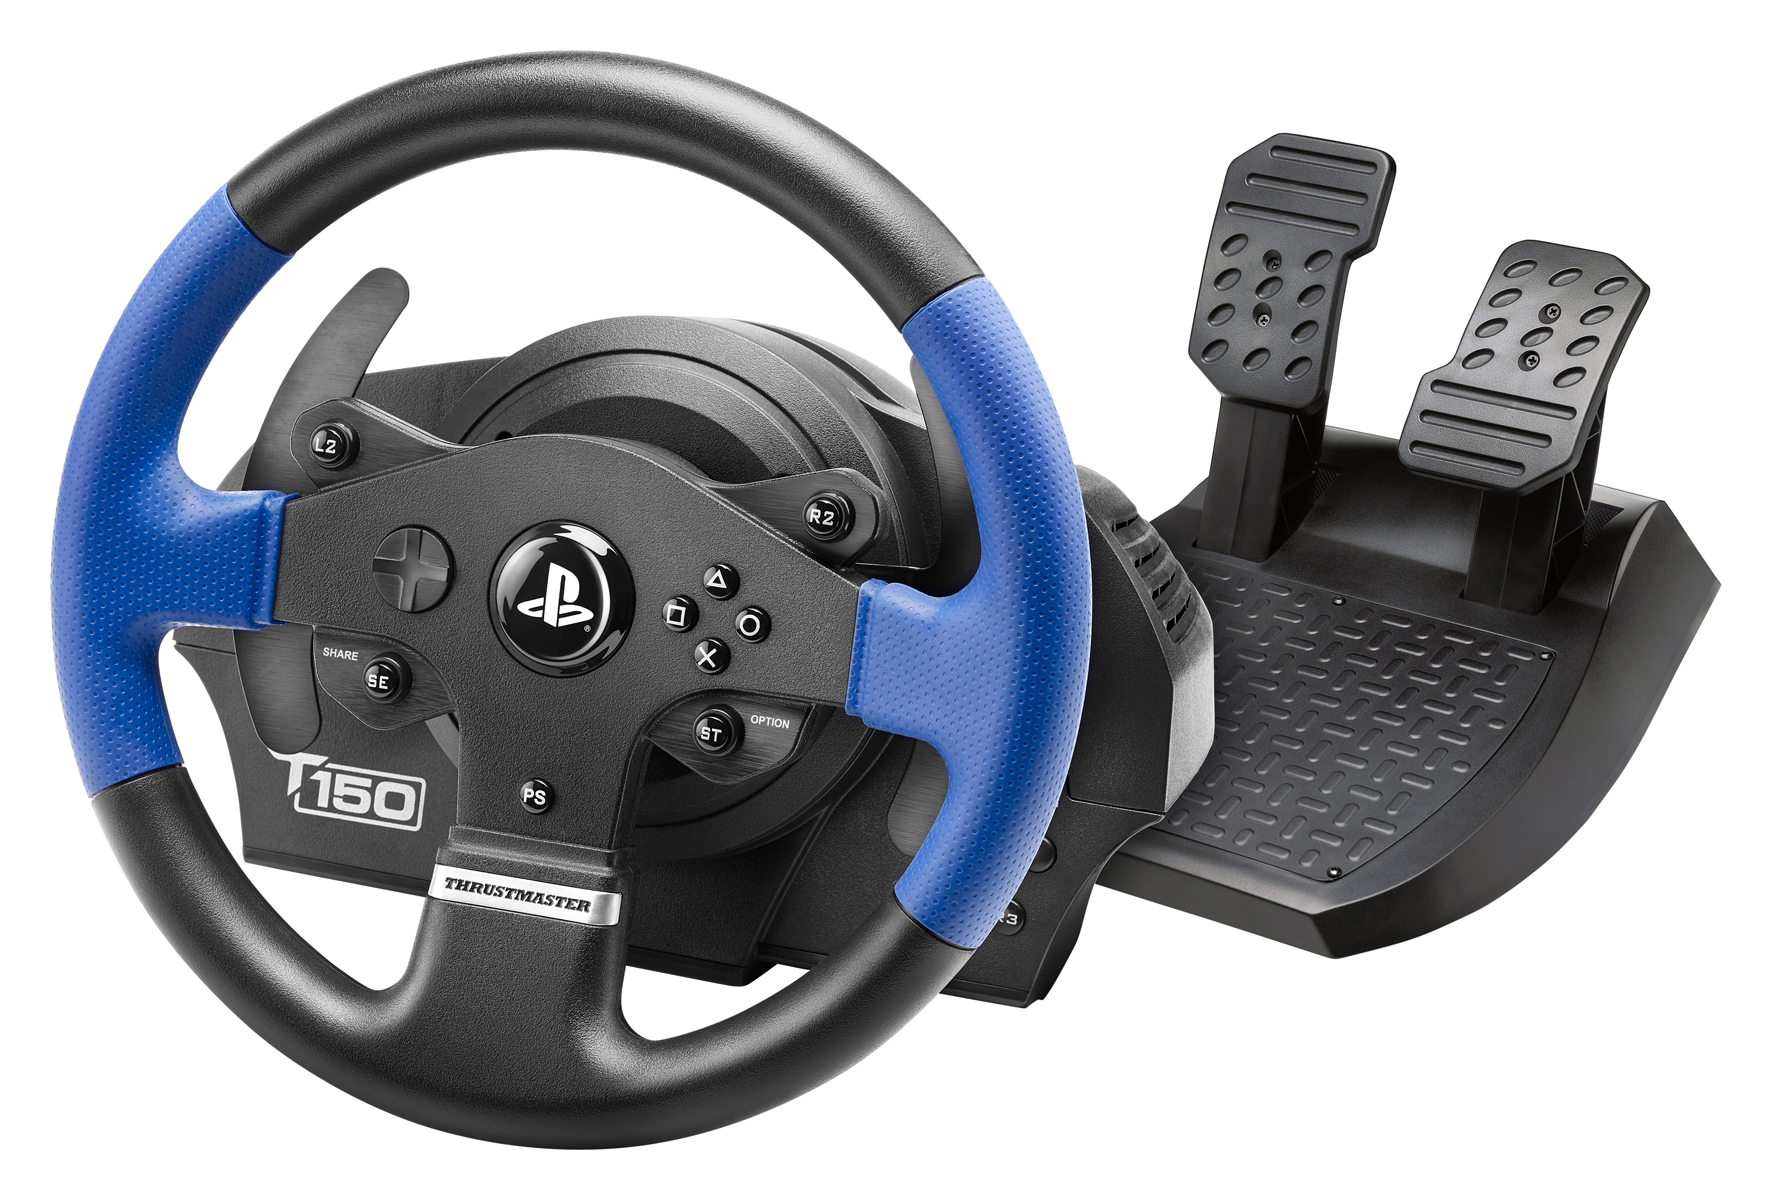 Thrustmaster - T150 Force Feedback Racing Wheel - Works with PS5 Games